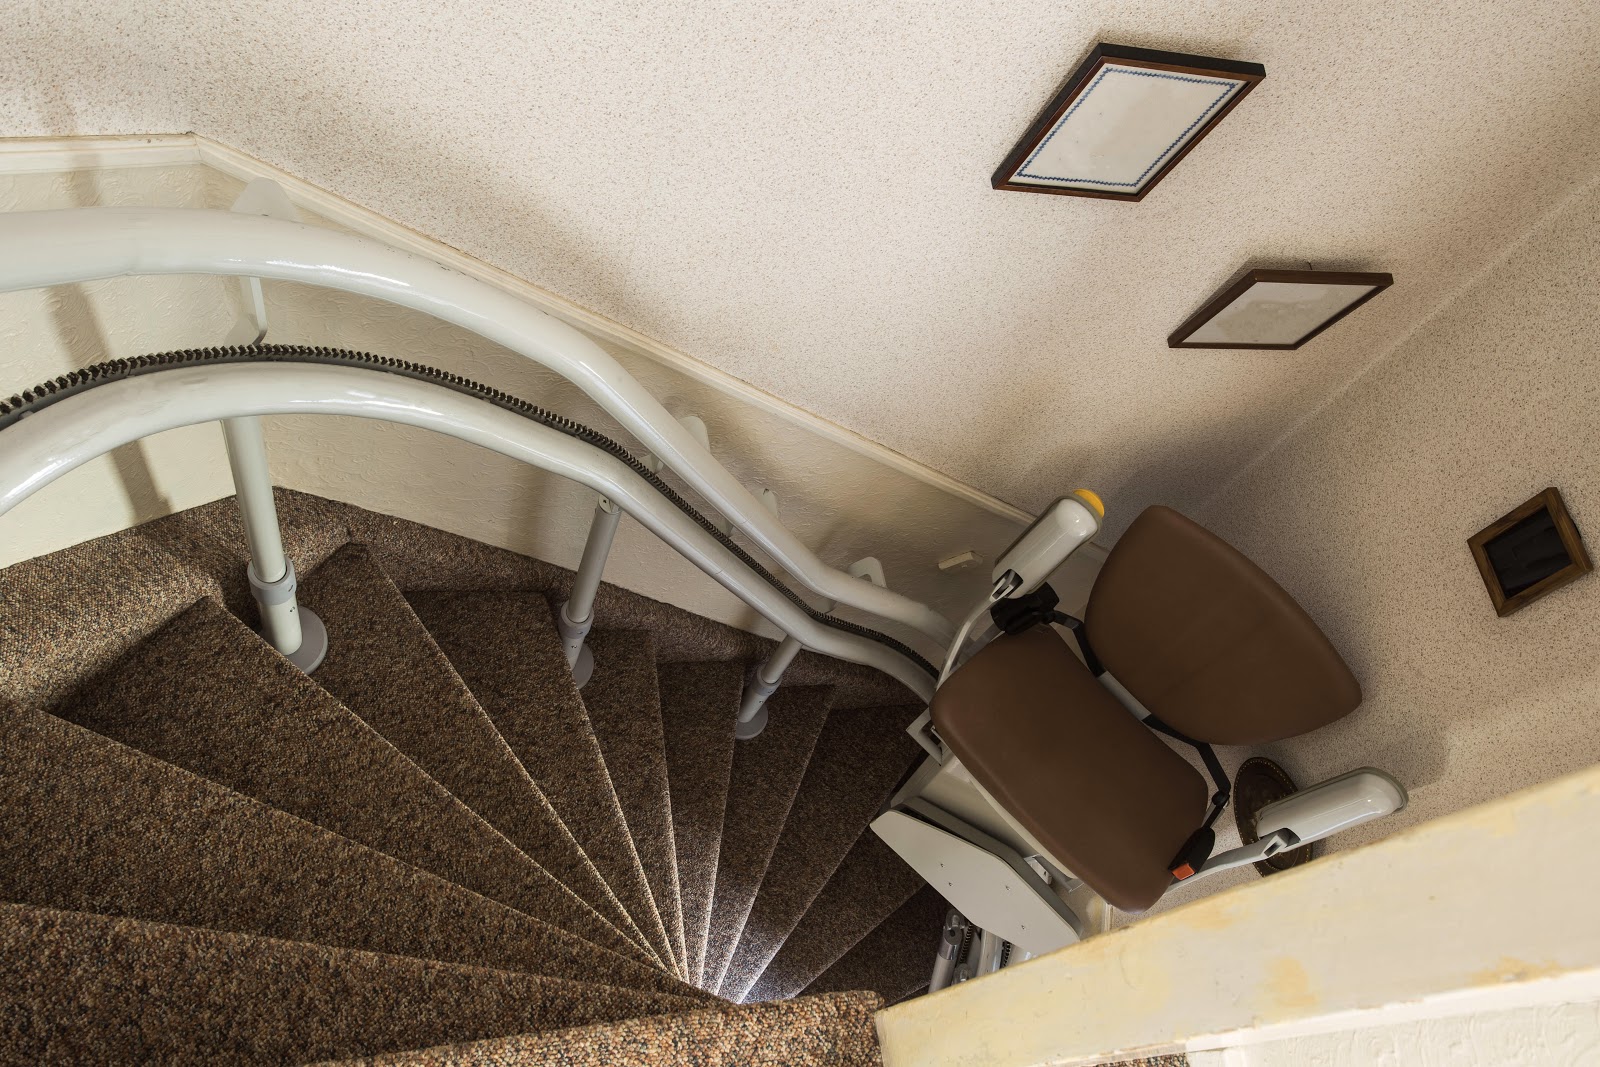 “Prepare For Liftoff!” With 3 Different Types of Stair Lifts